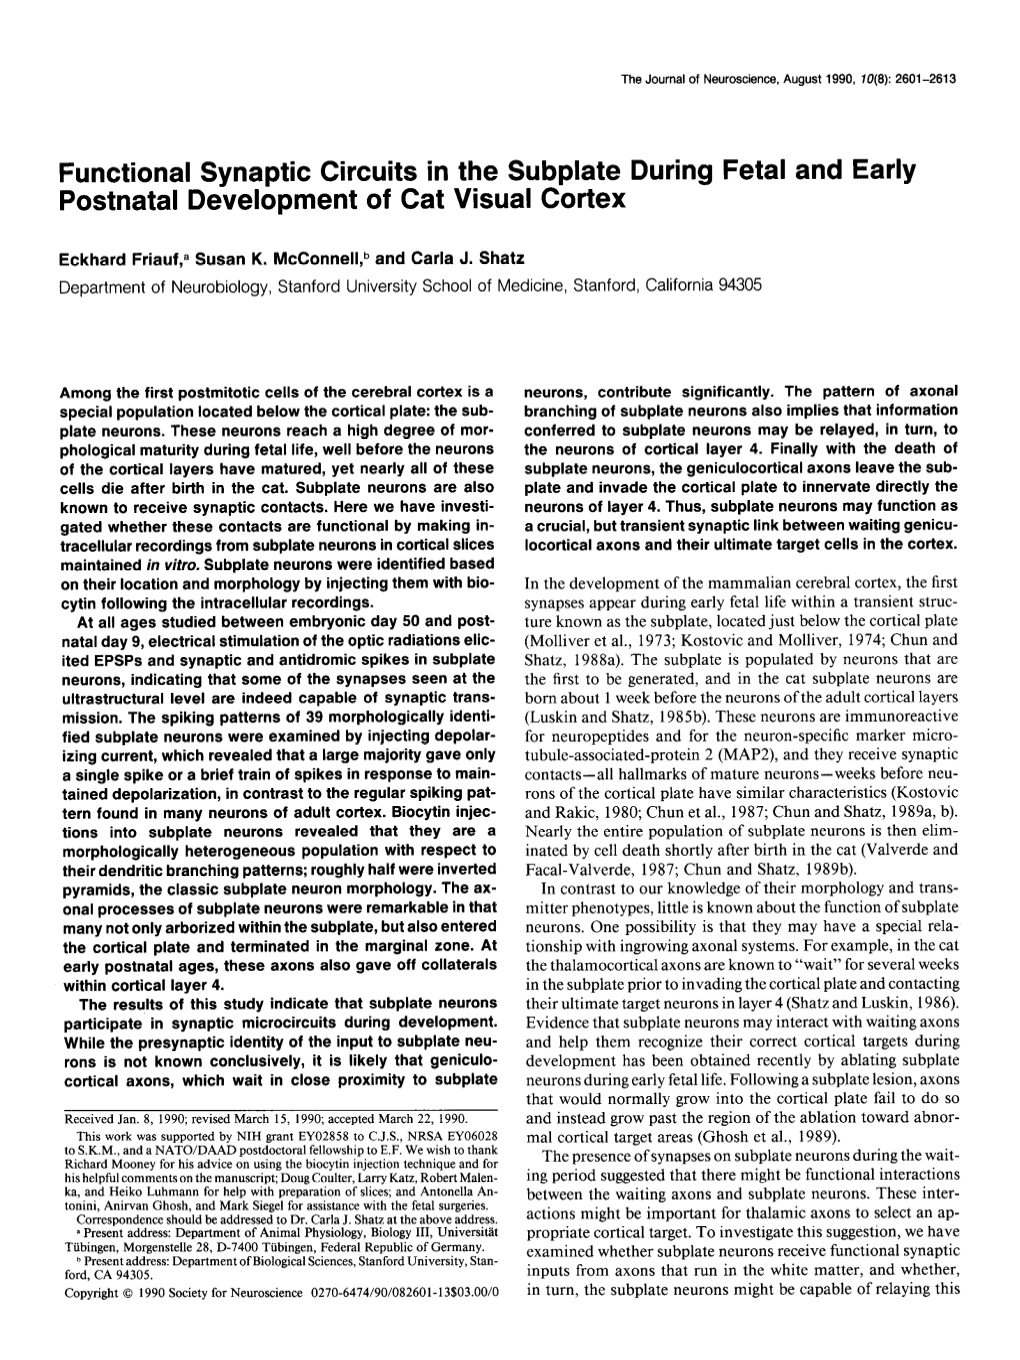 Functional Synaptic Circuits in the Subplate During Fetal and Early Postnatal Development of Cat Visual Cortex